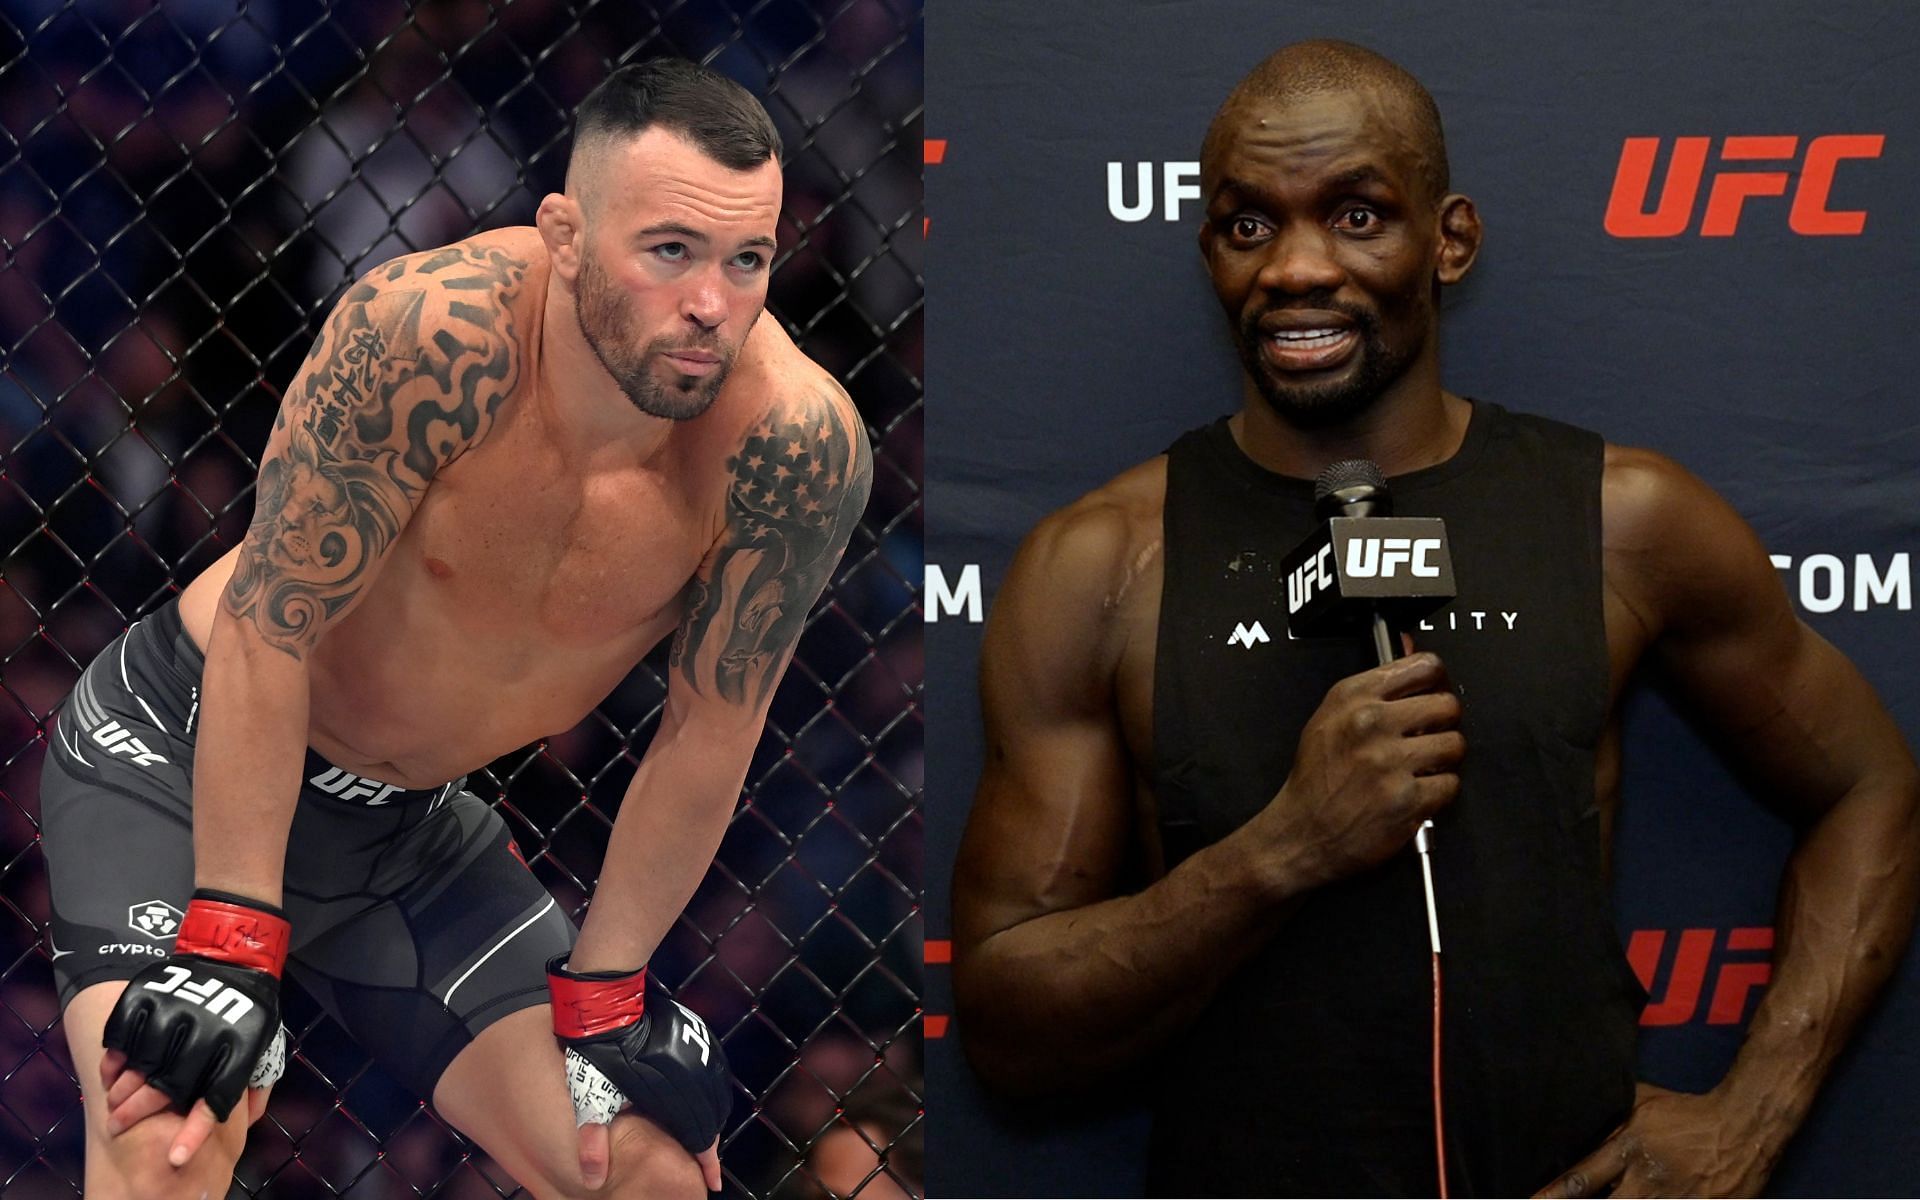 Colby Covington (left) and Themba Gorimbo (right). [Images courtesy: left image via Getty Images and right image via UFC]